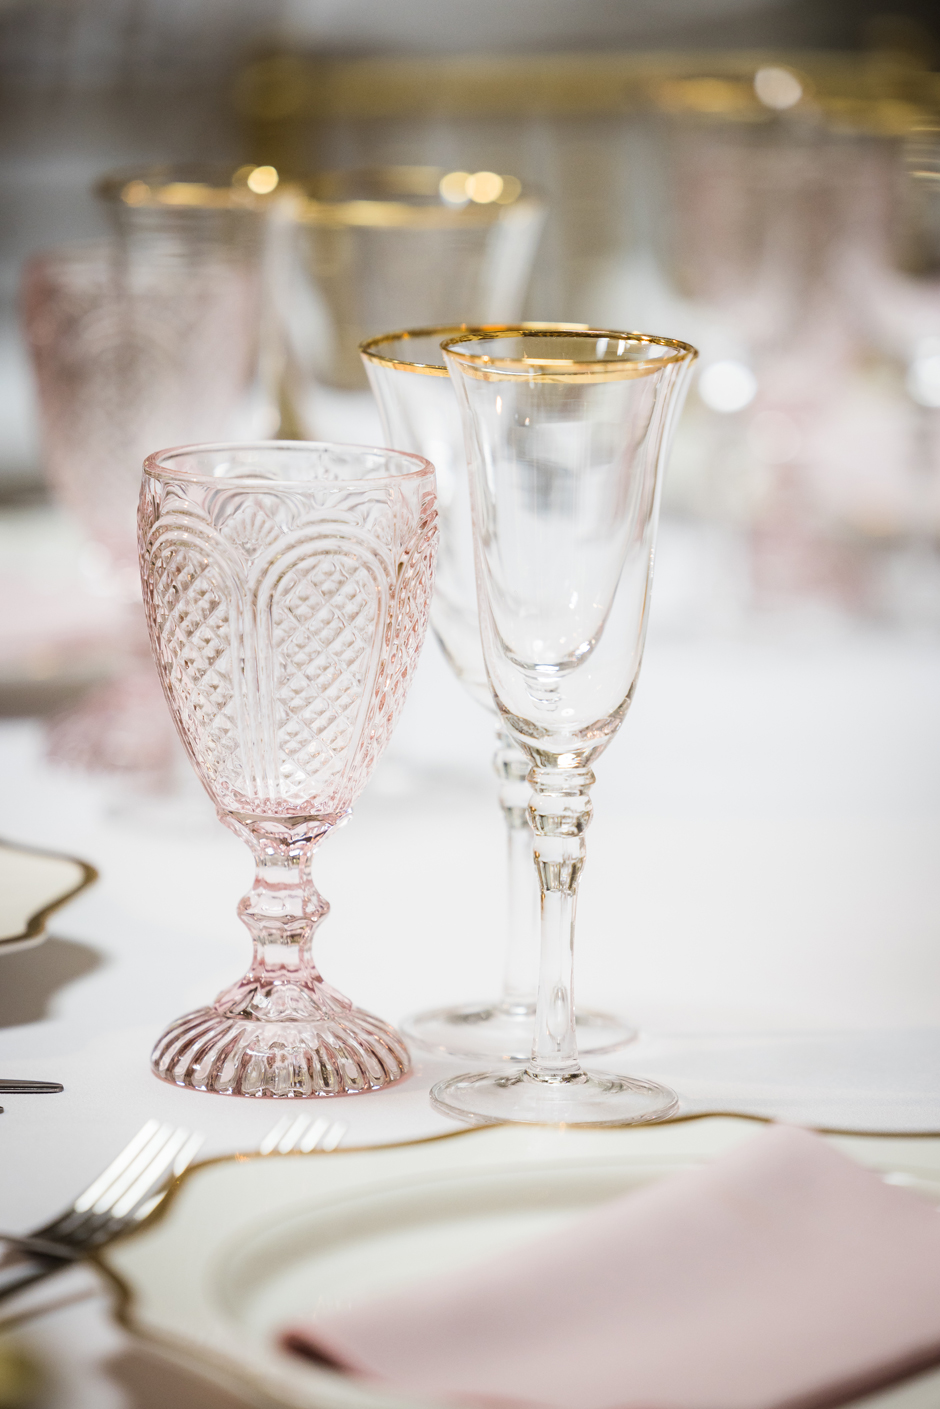 Pink goblet with white Essential linen, peony Gelato napkin, gold trim Porcelain charger plate & gold trim glasses